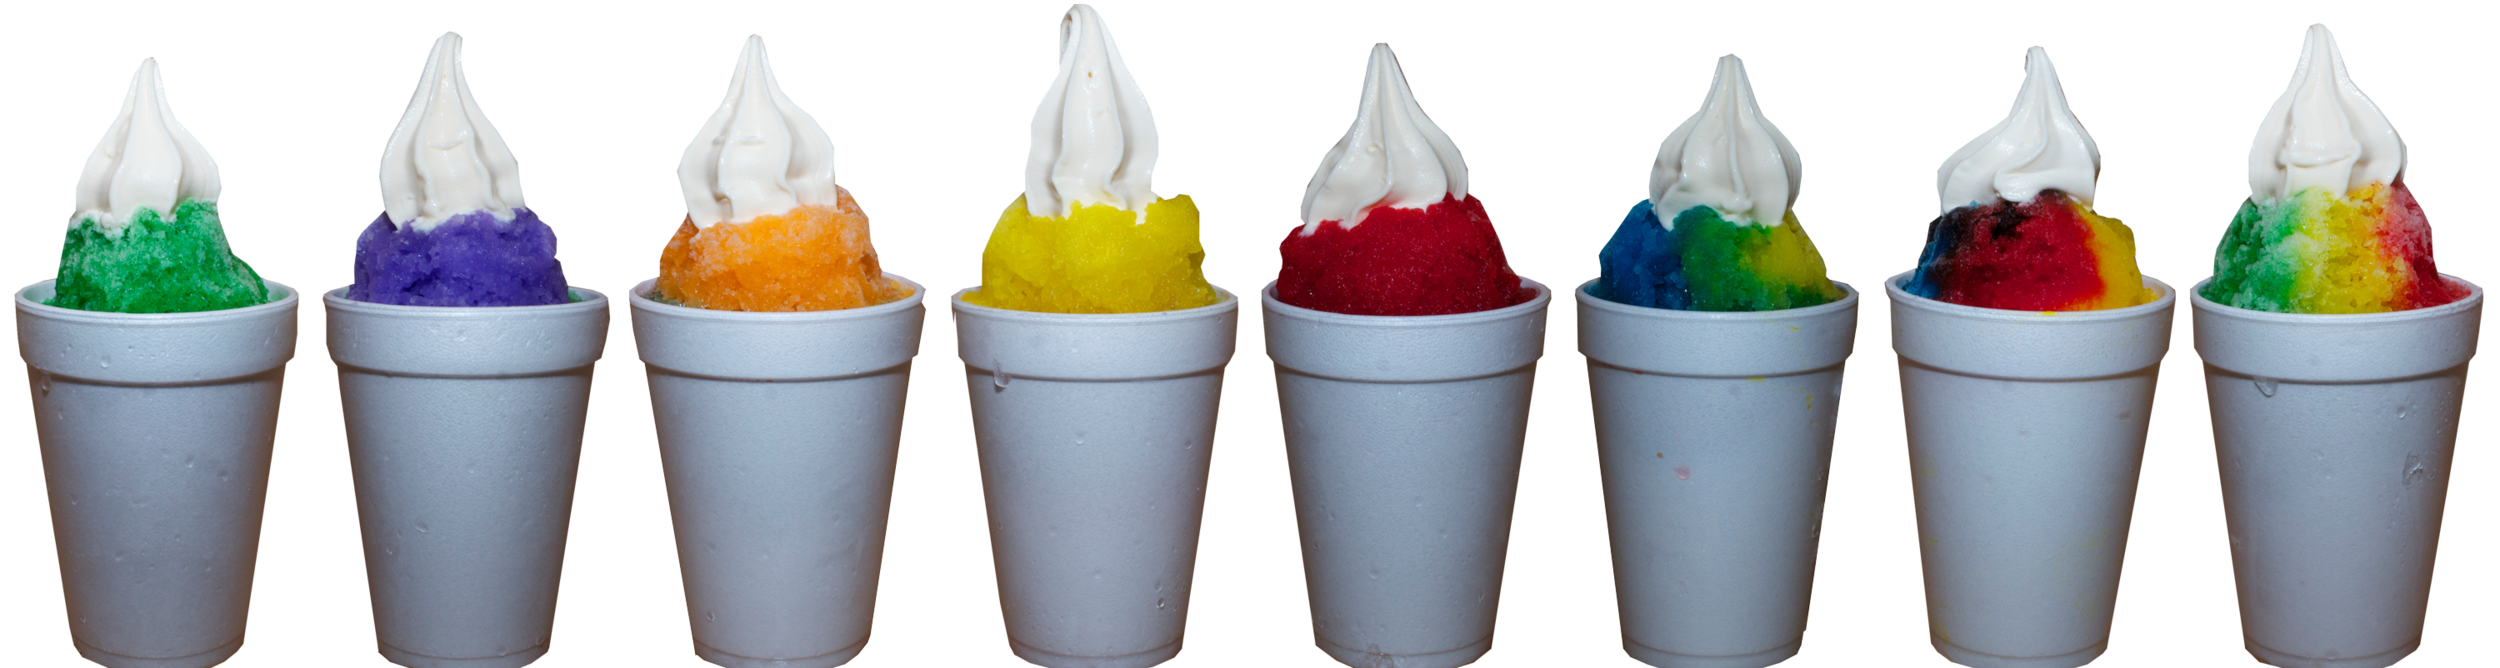 snowconeall.png